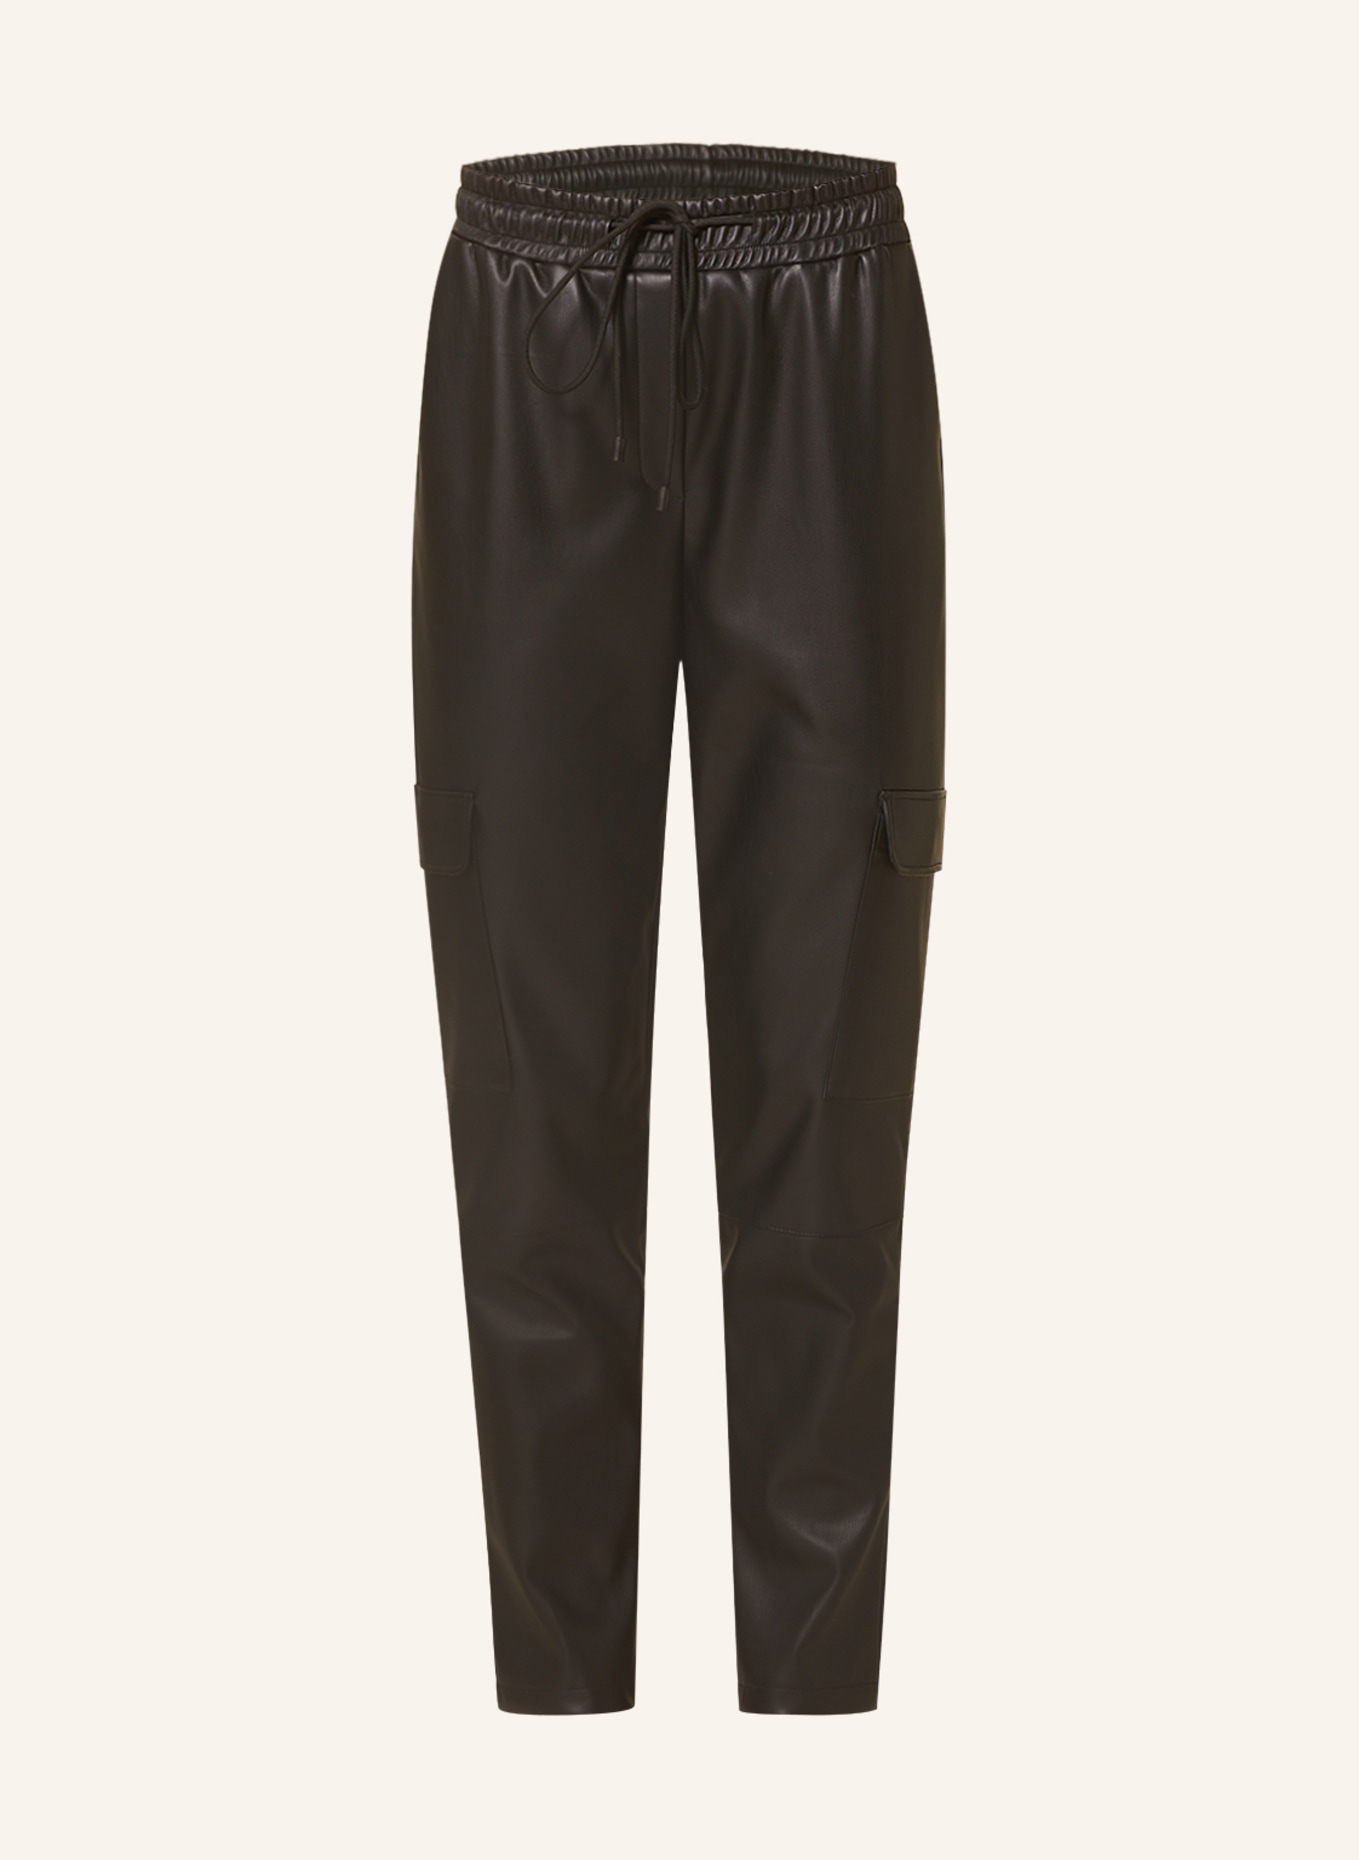 darling harbour Pants in jogger style in leather look, Color: SCHWARZ (Image 1)